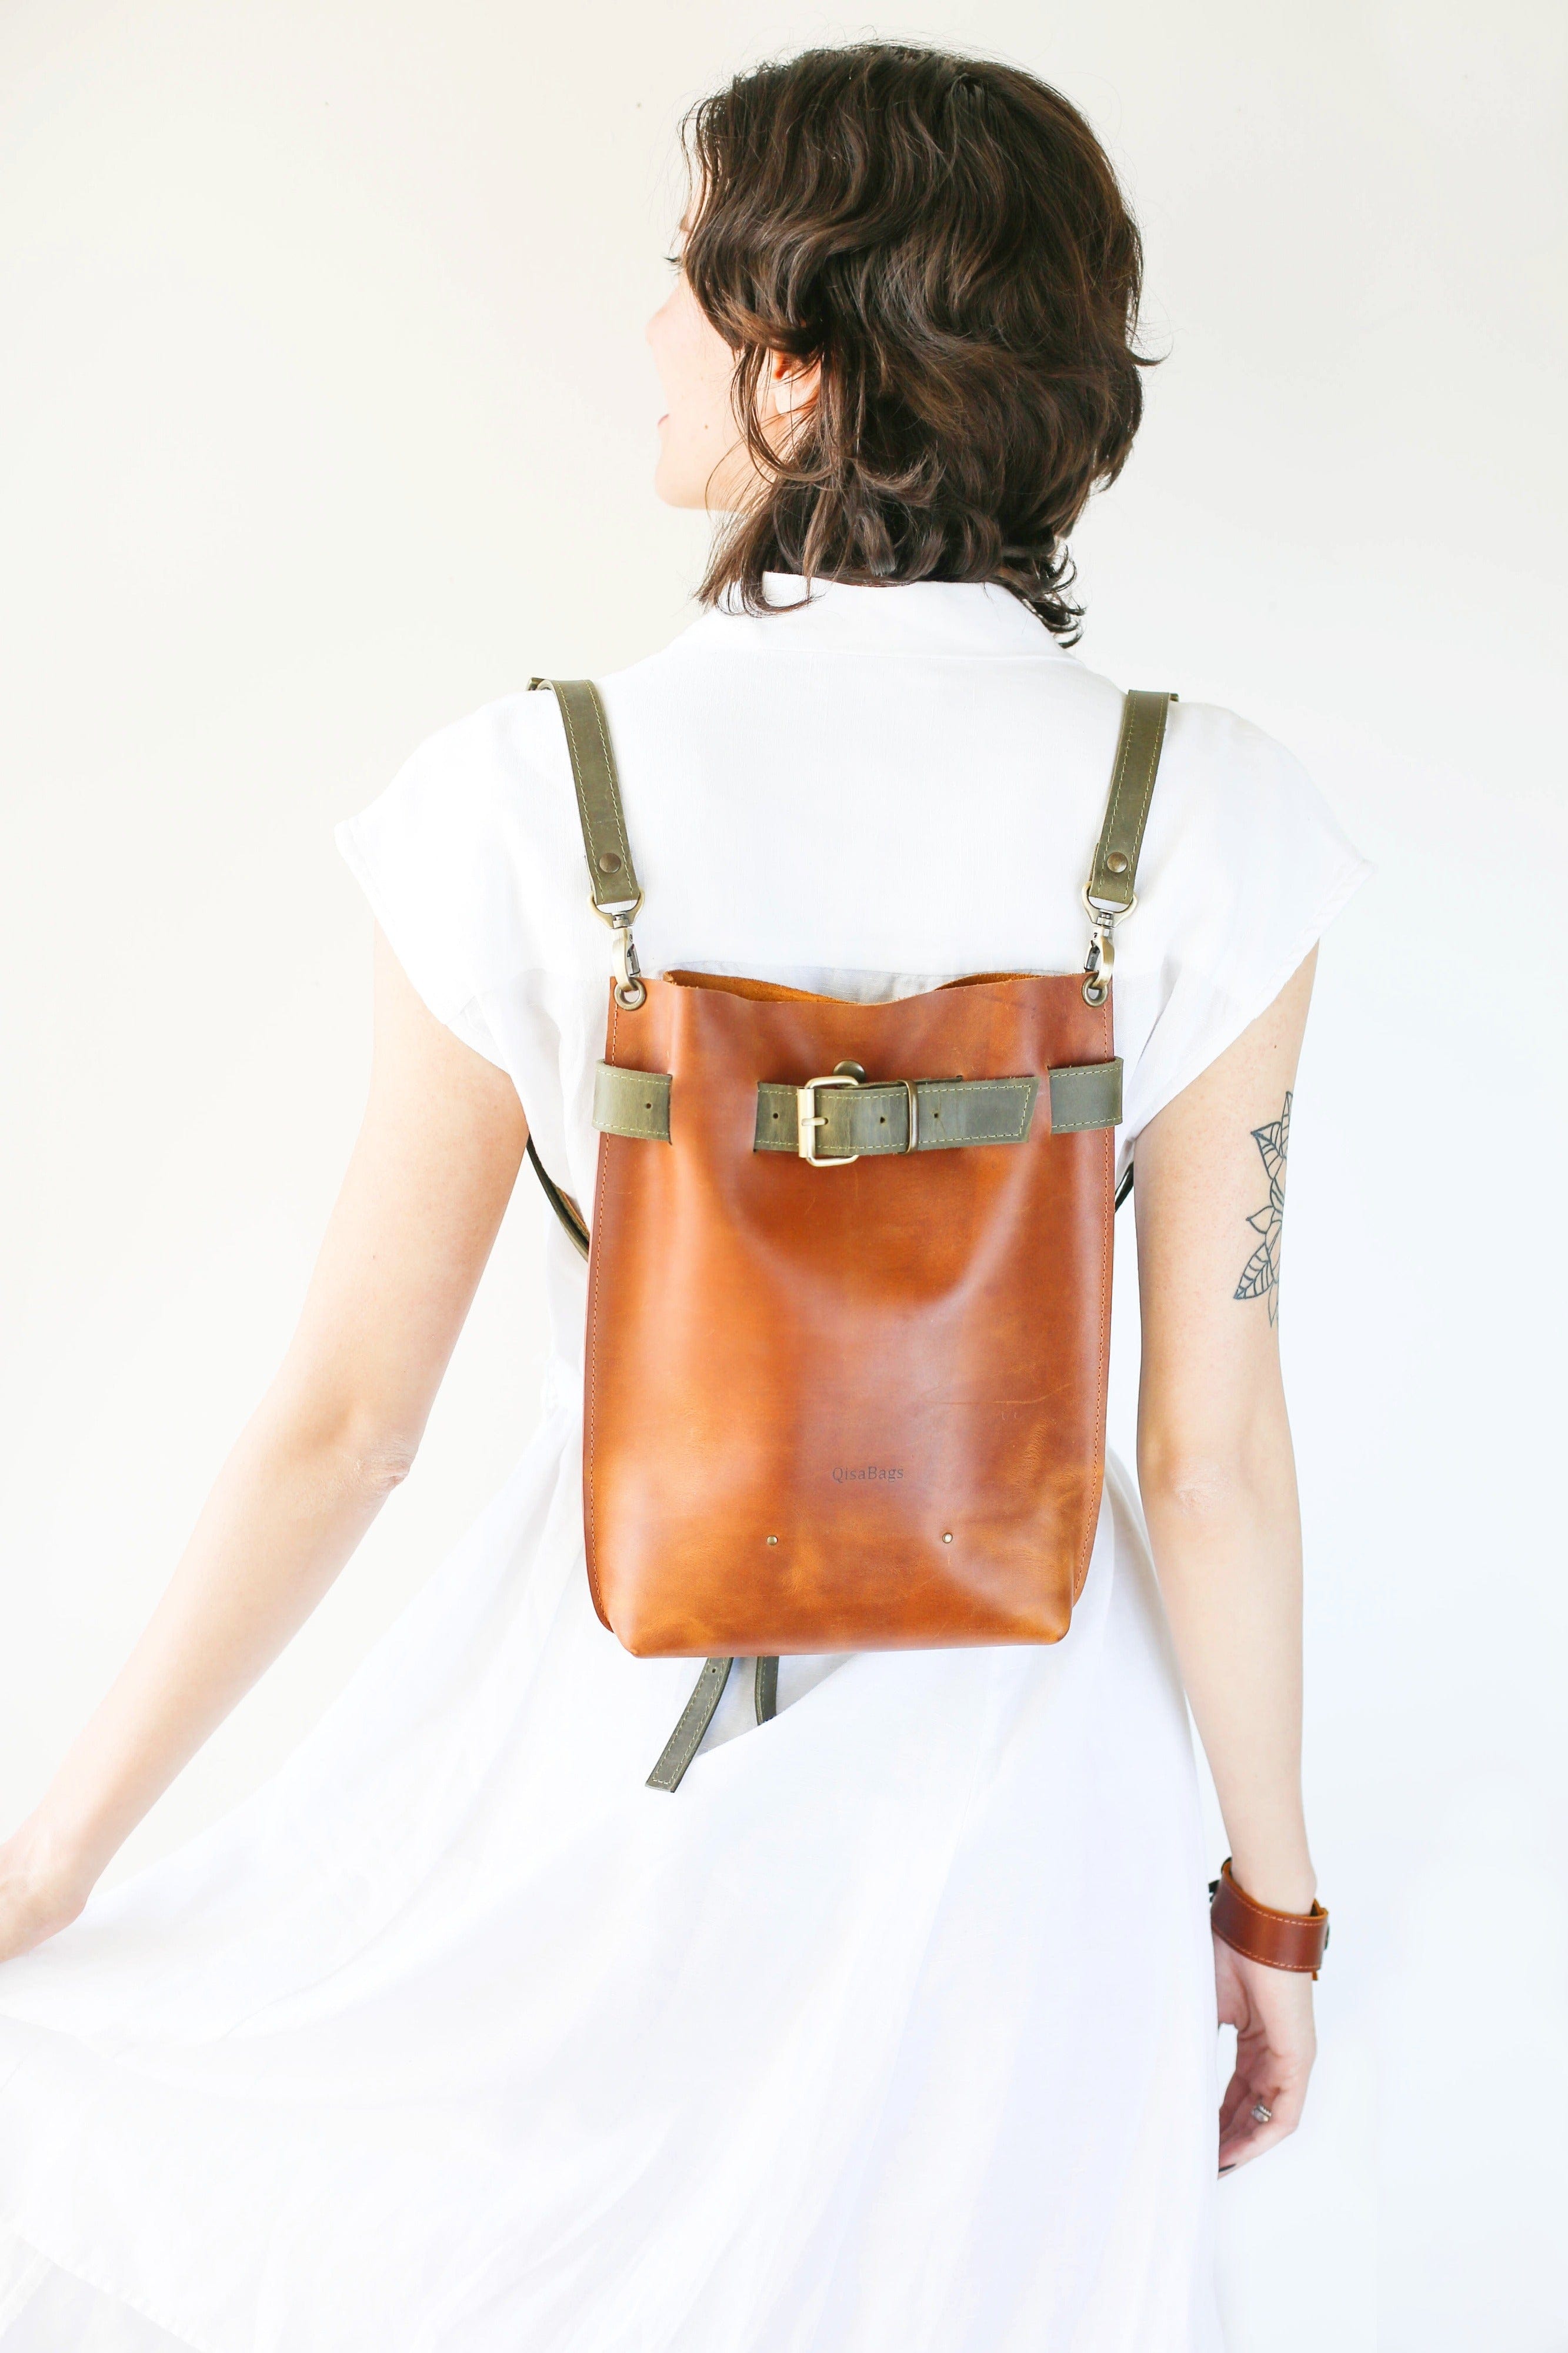 Crazy Horse Leather Hobo Bag - Brown